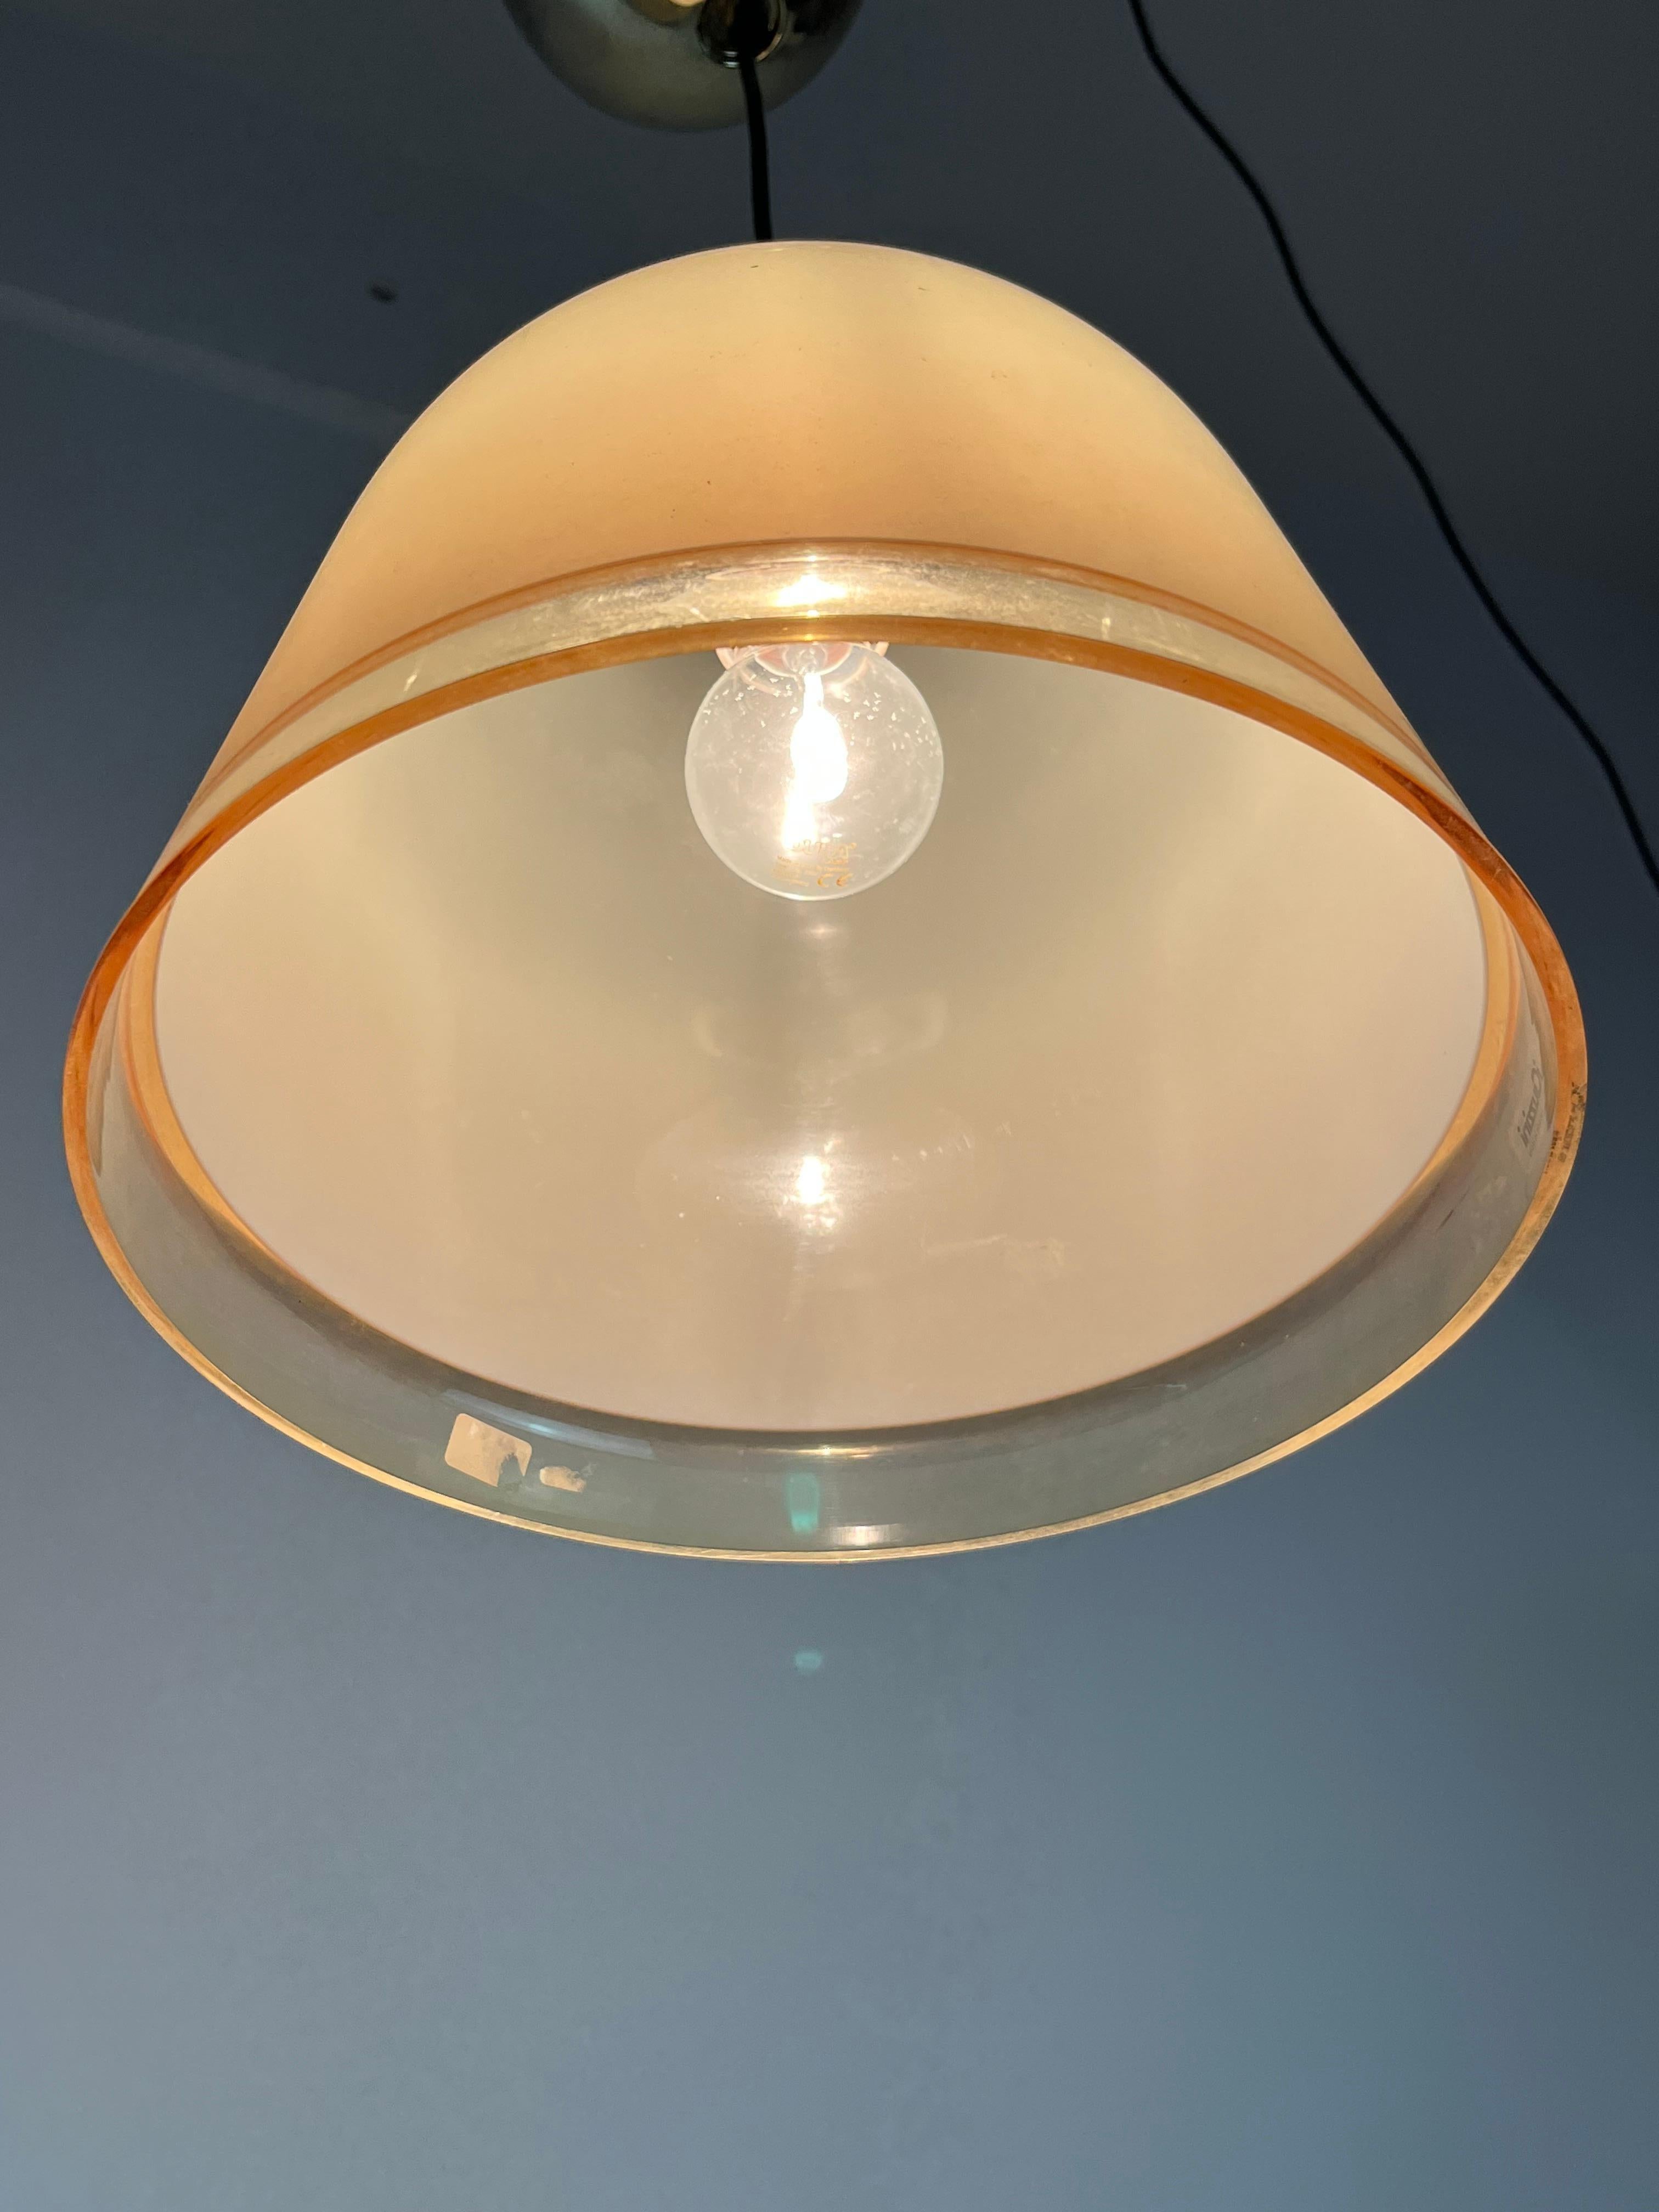 Pair of Kuala model chandeliers, designed by Franco Bresciani and produced by iGuzzini, 1975.
Bell-shaped conical lampshade, made of ocher-colored translucent acrylic. It has a chromed metal sphere, gold color, on the top of the lampshade. Attack E